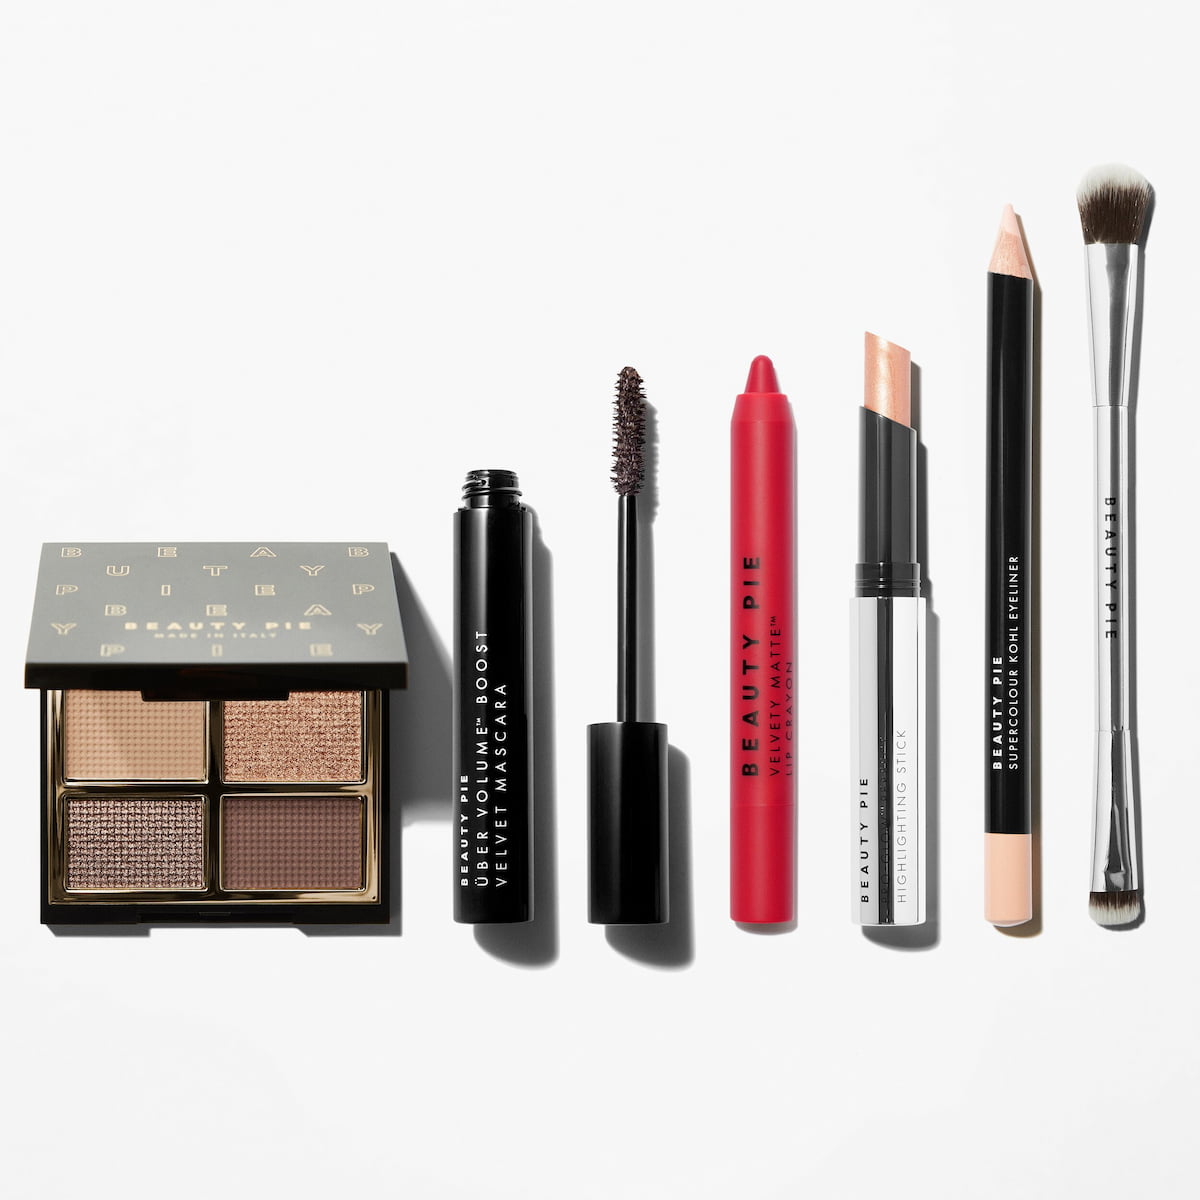 Beauty Pie X Pati Dubroff + The Perfect Red Lip Look Kit